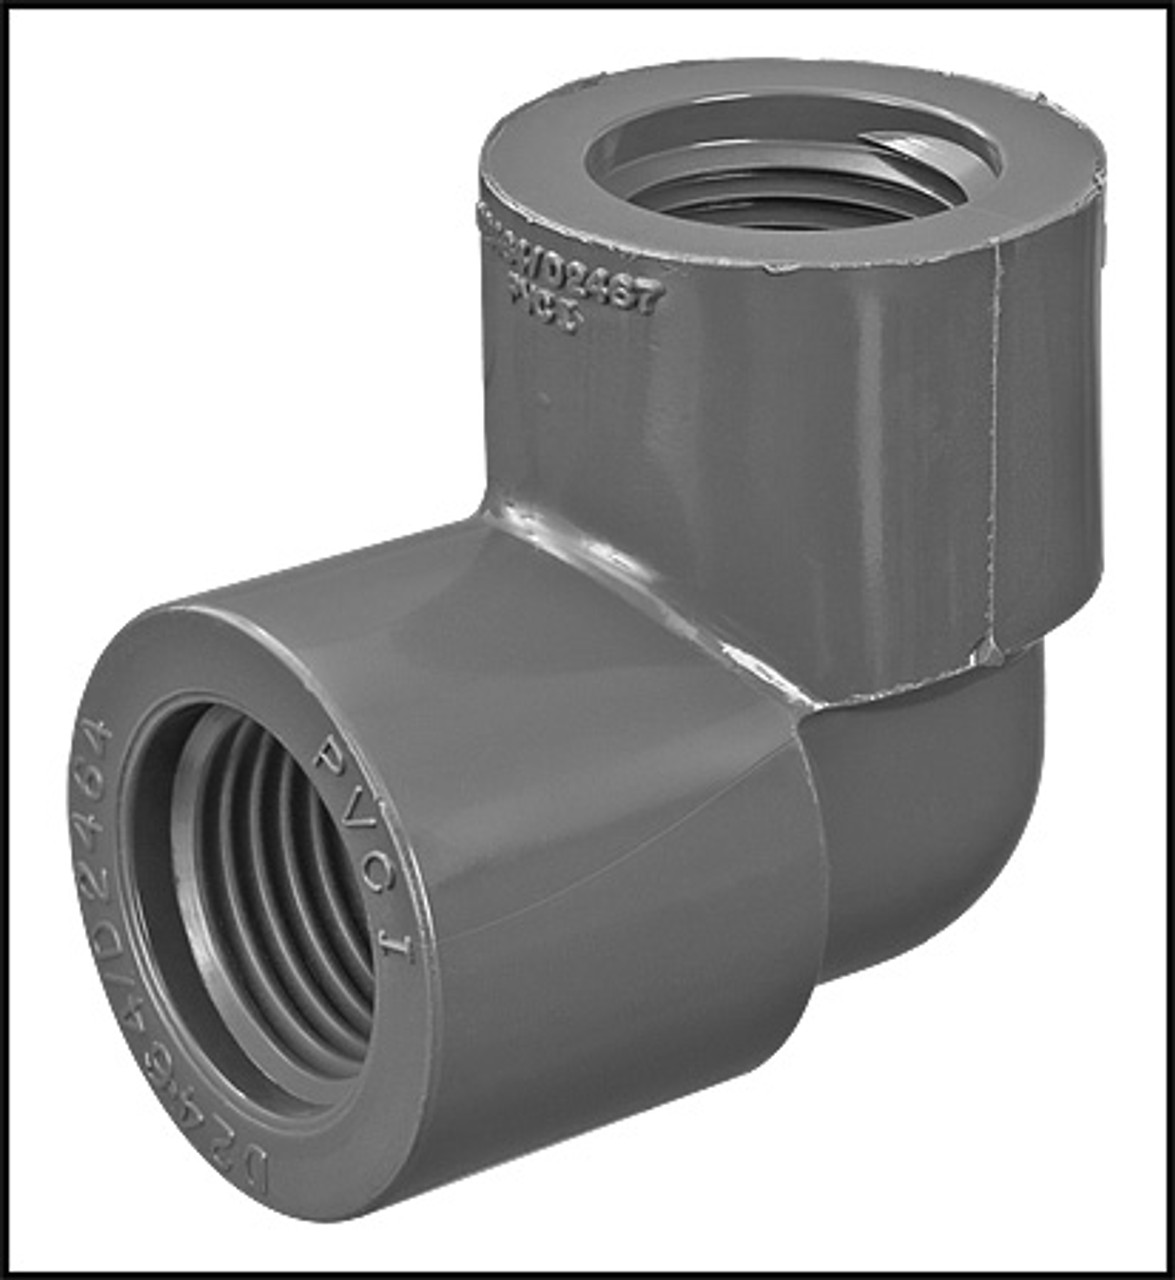 Lasco 3/4" 90 Degree Elbow Pipe Fitting SCH 80 FPT X FPT (#808-007)